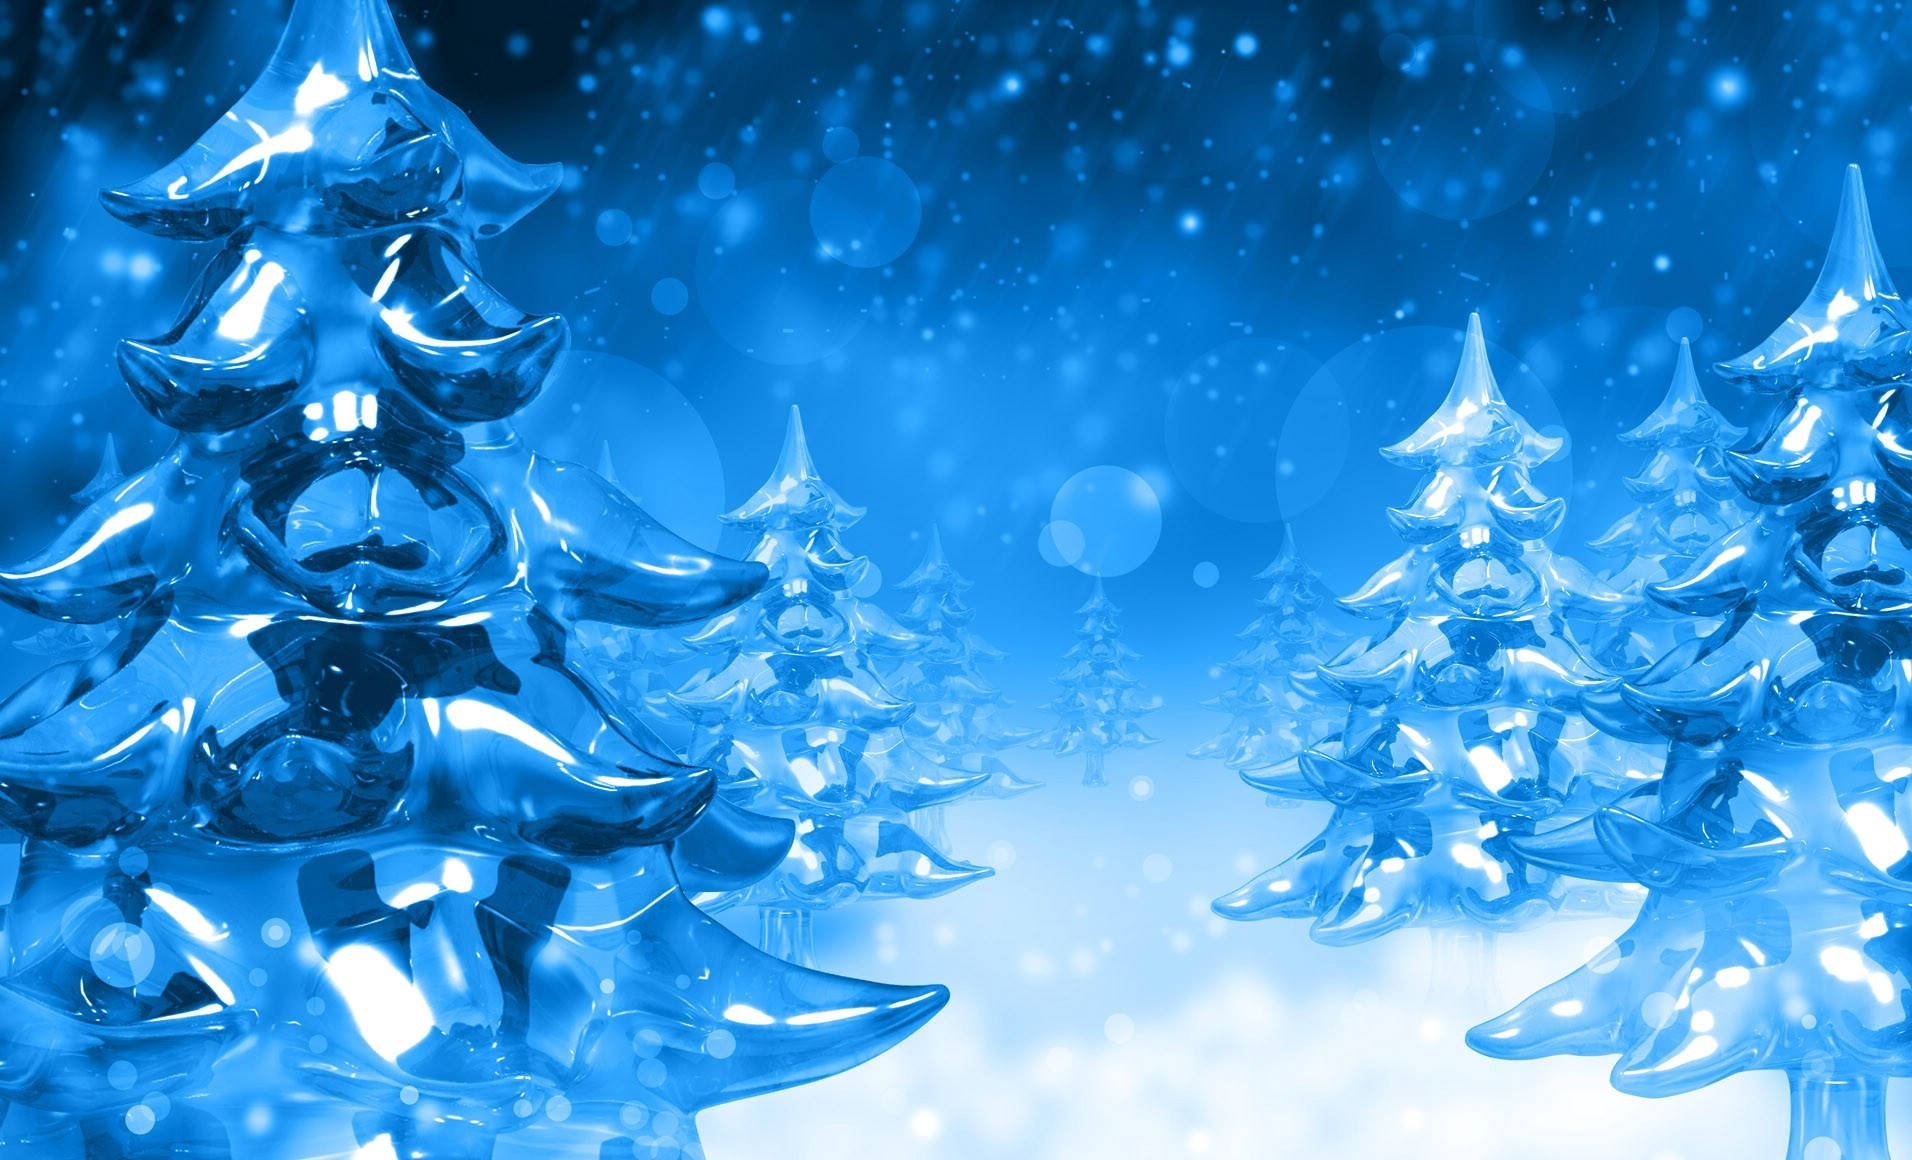 Celebrate the Holidays with Christmas Widescreen Wallpaper